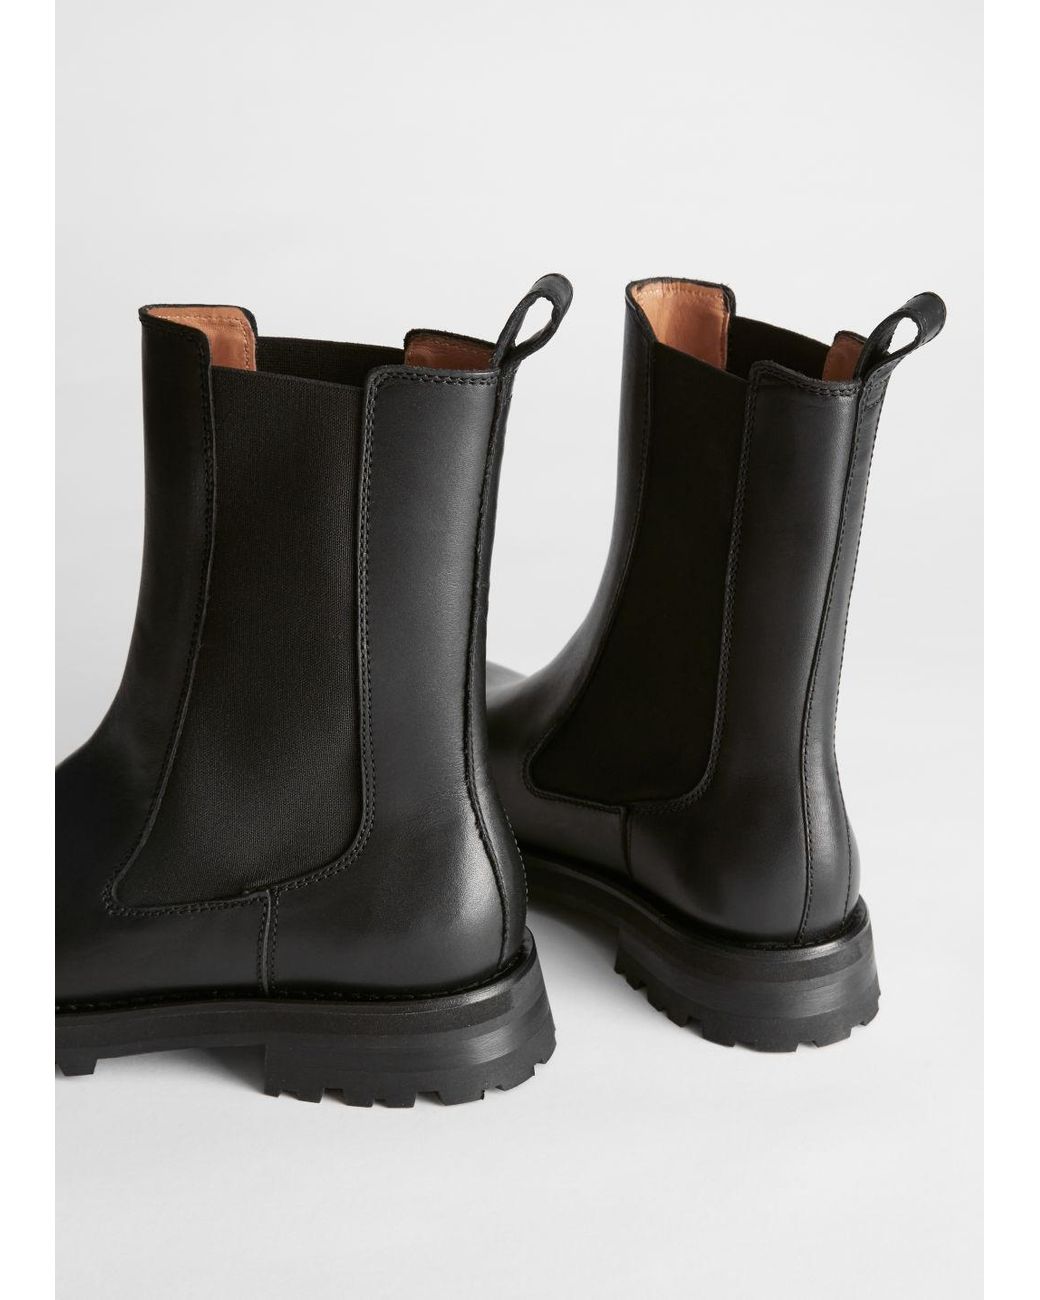 & Other Stories Chunky Chelsea Boots in Black - Lyst